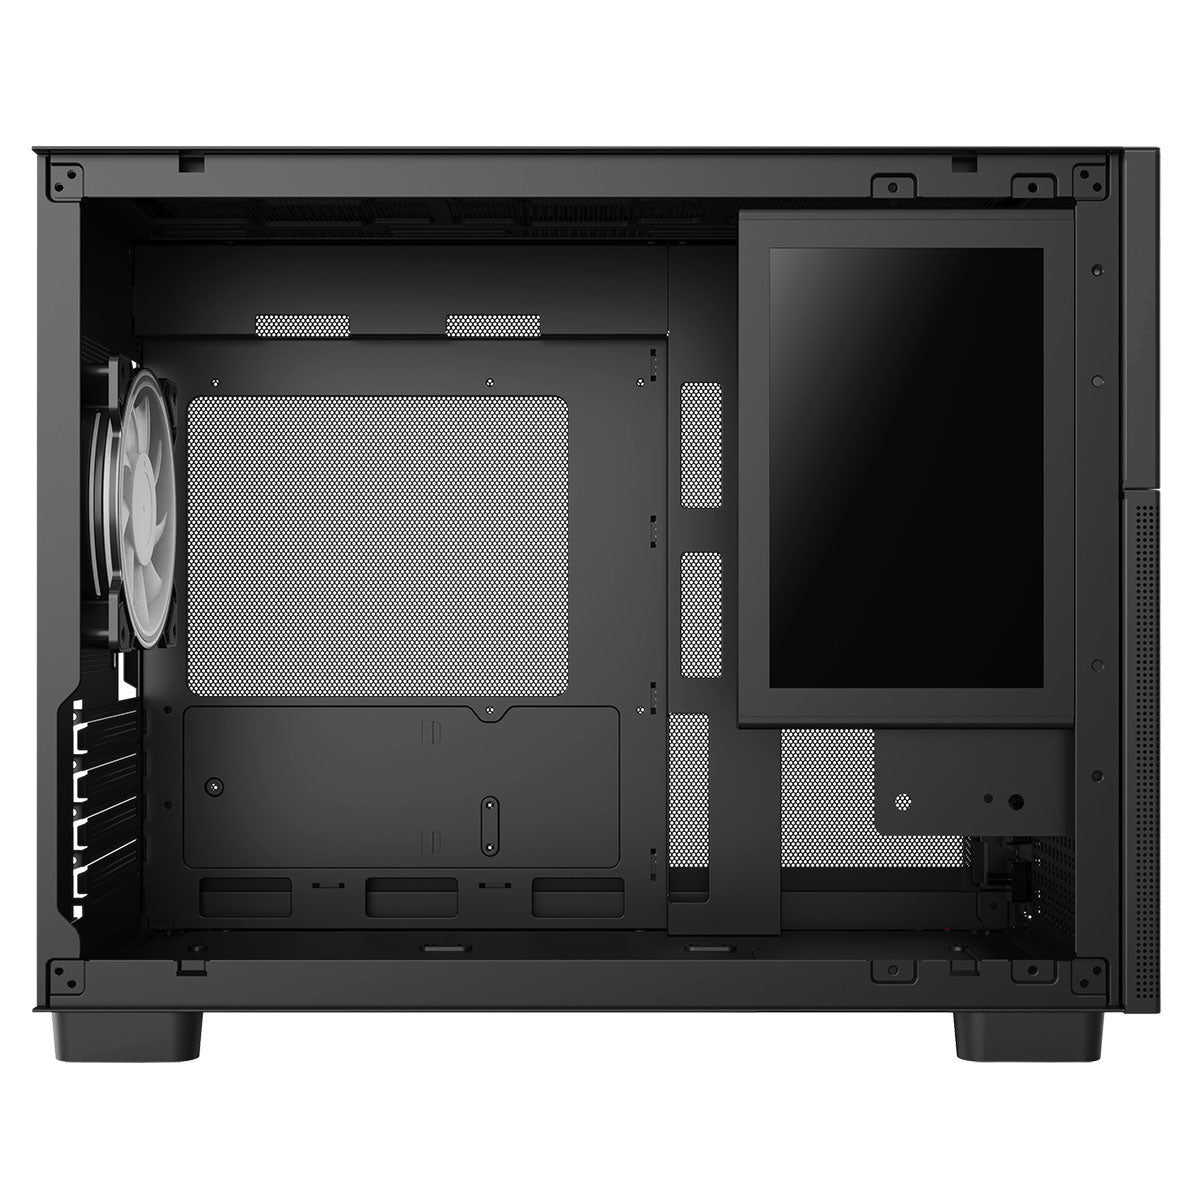 CiT Pro Jupiter Black Micro-ATX PC Gaming Case with 8 Inch LCD Screen 1 x 120mm Infinity Fan Included, USB-C, Tempered Glass Side Panel.